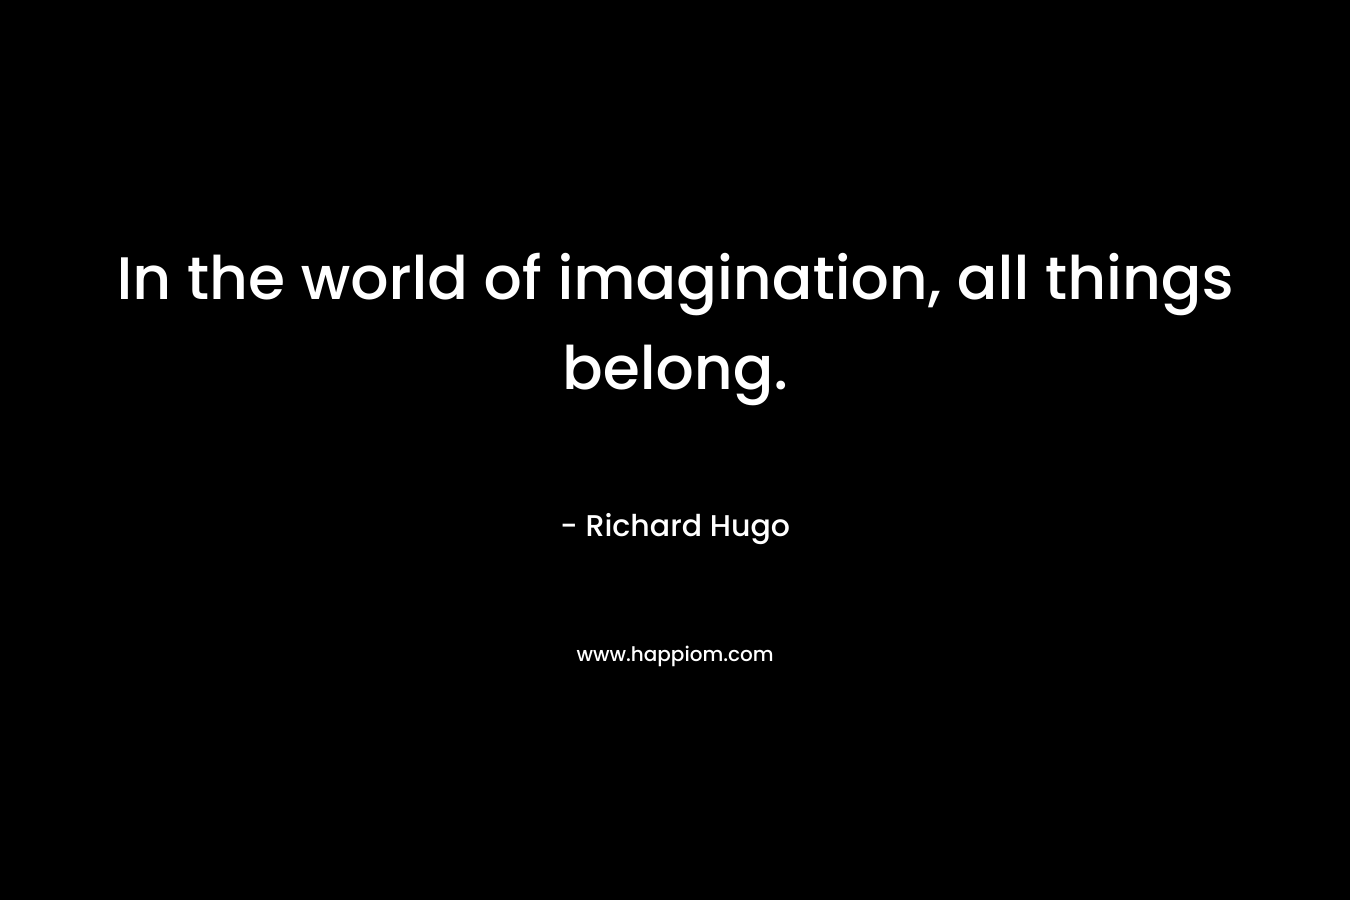 In the world of imagination, all things belong.